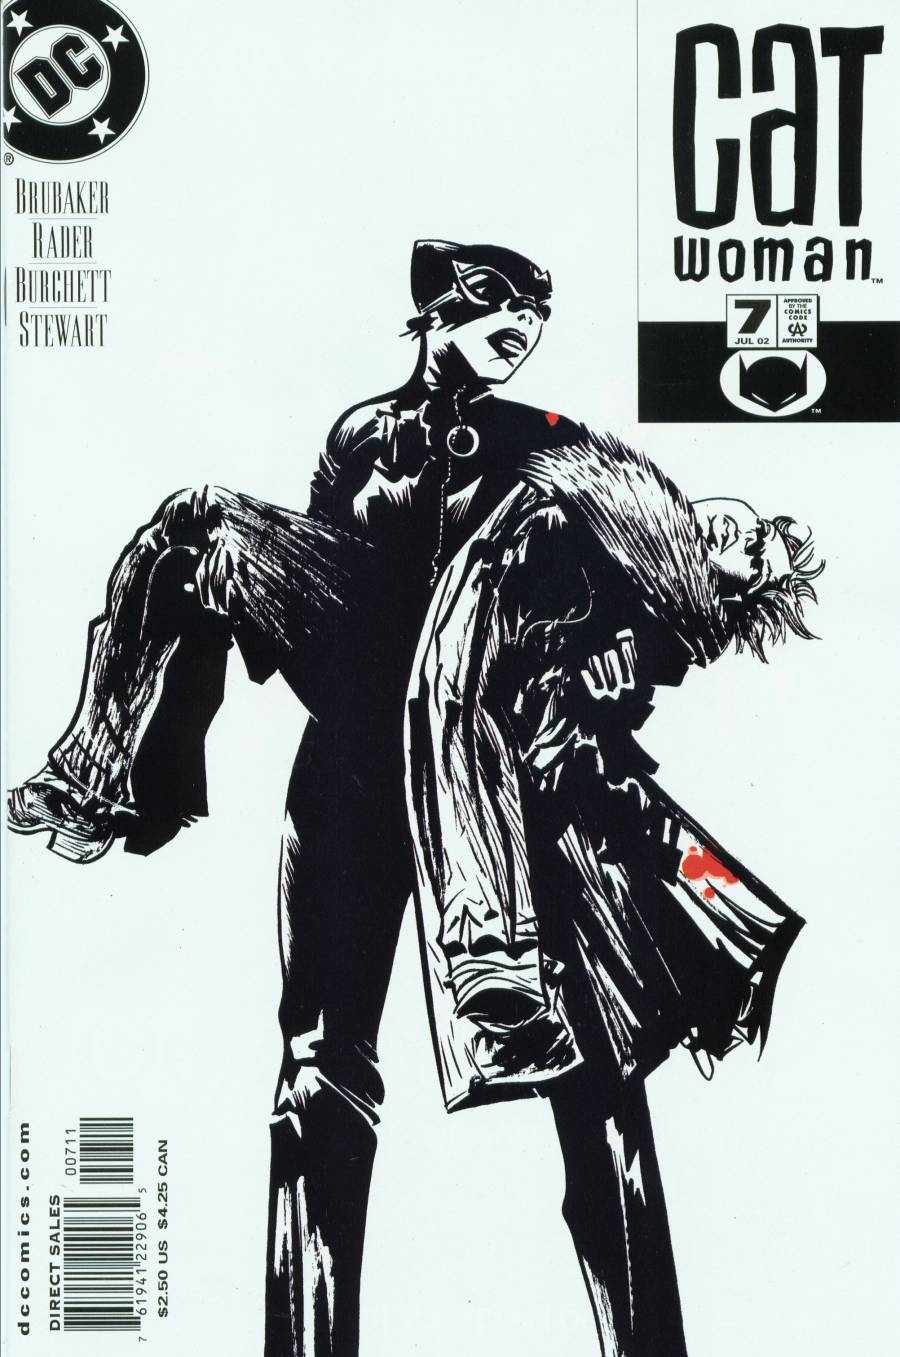 beatscomicsandlife:
“ Catwoman vol. 2 issue 7 cover by Paul Pope
”